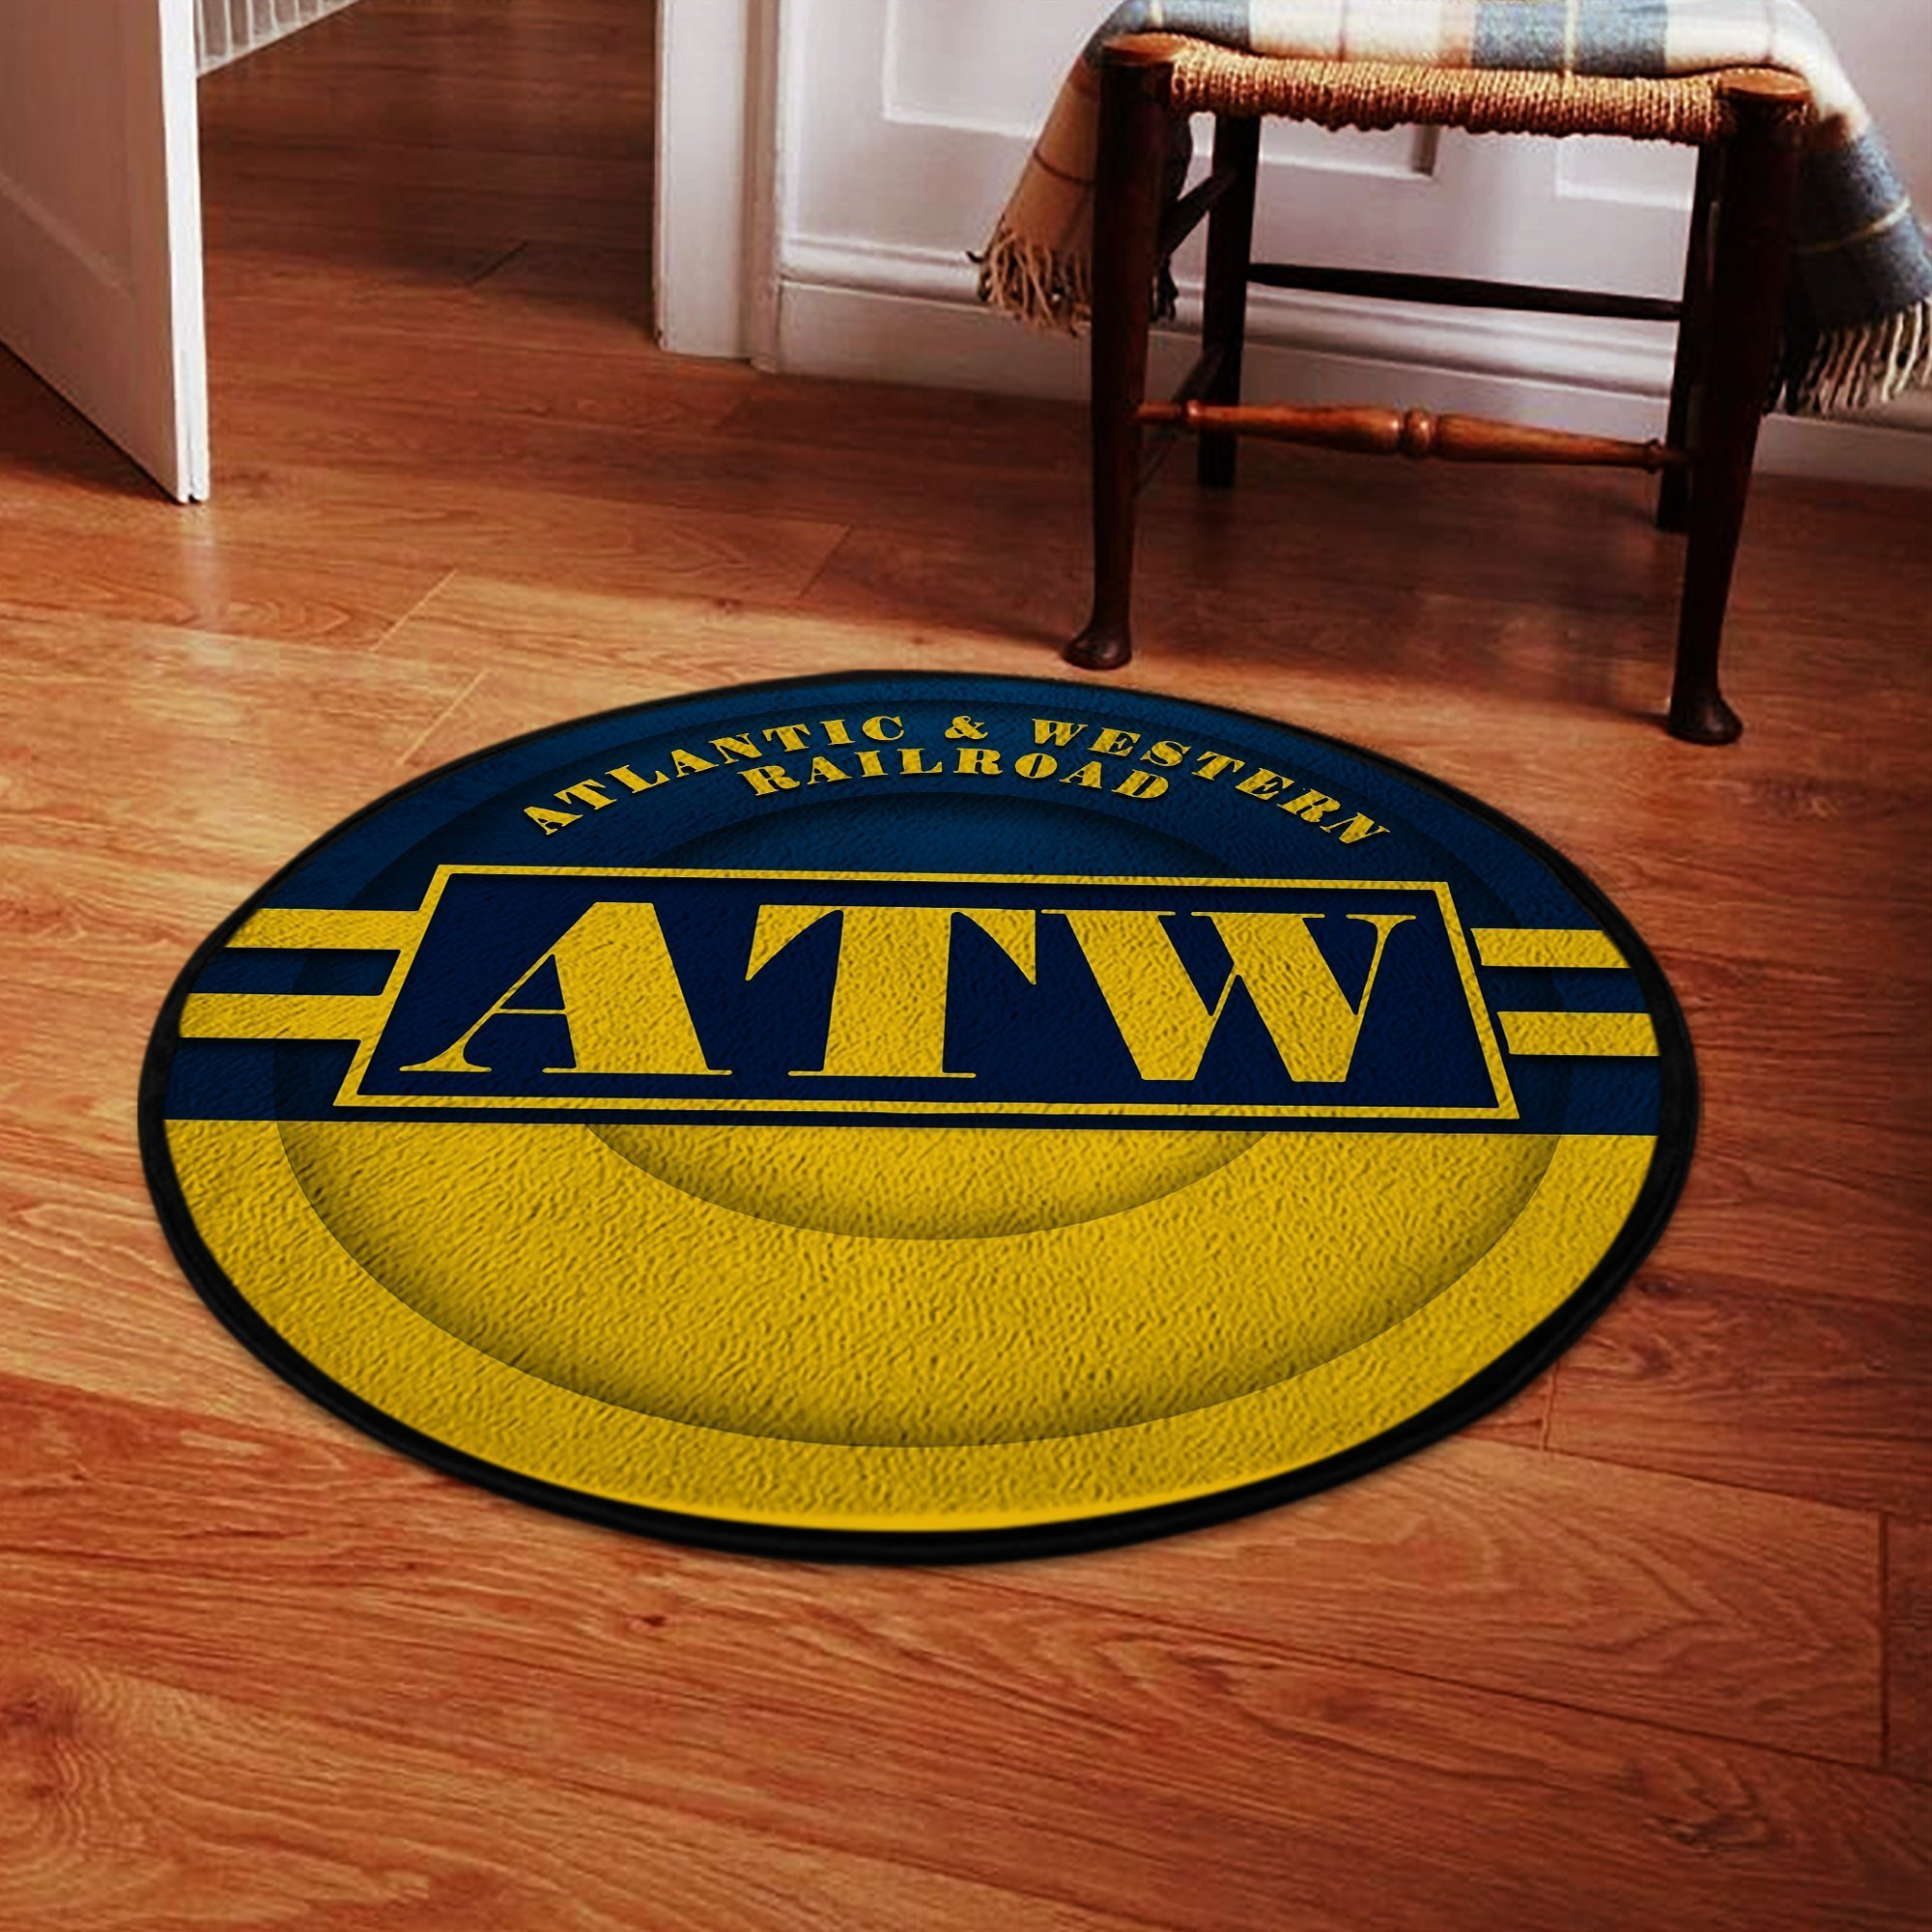 Awrr Round Mat Atlantic & Western Railroad Round Floor Mat Room Rugs Carpet Outdoor Rug Washable Rugs S (24In)